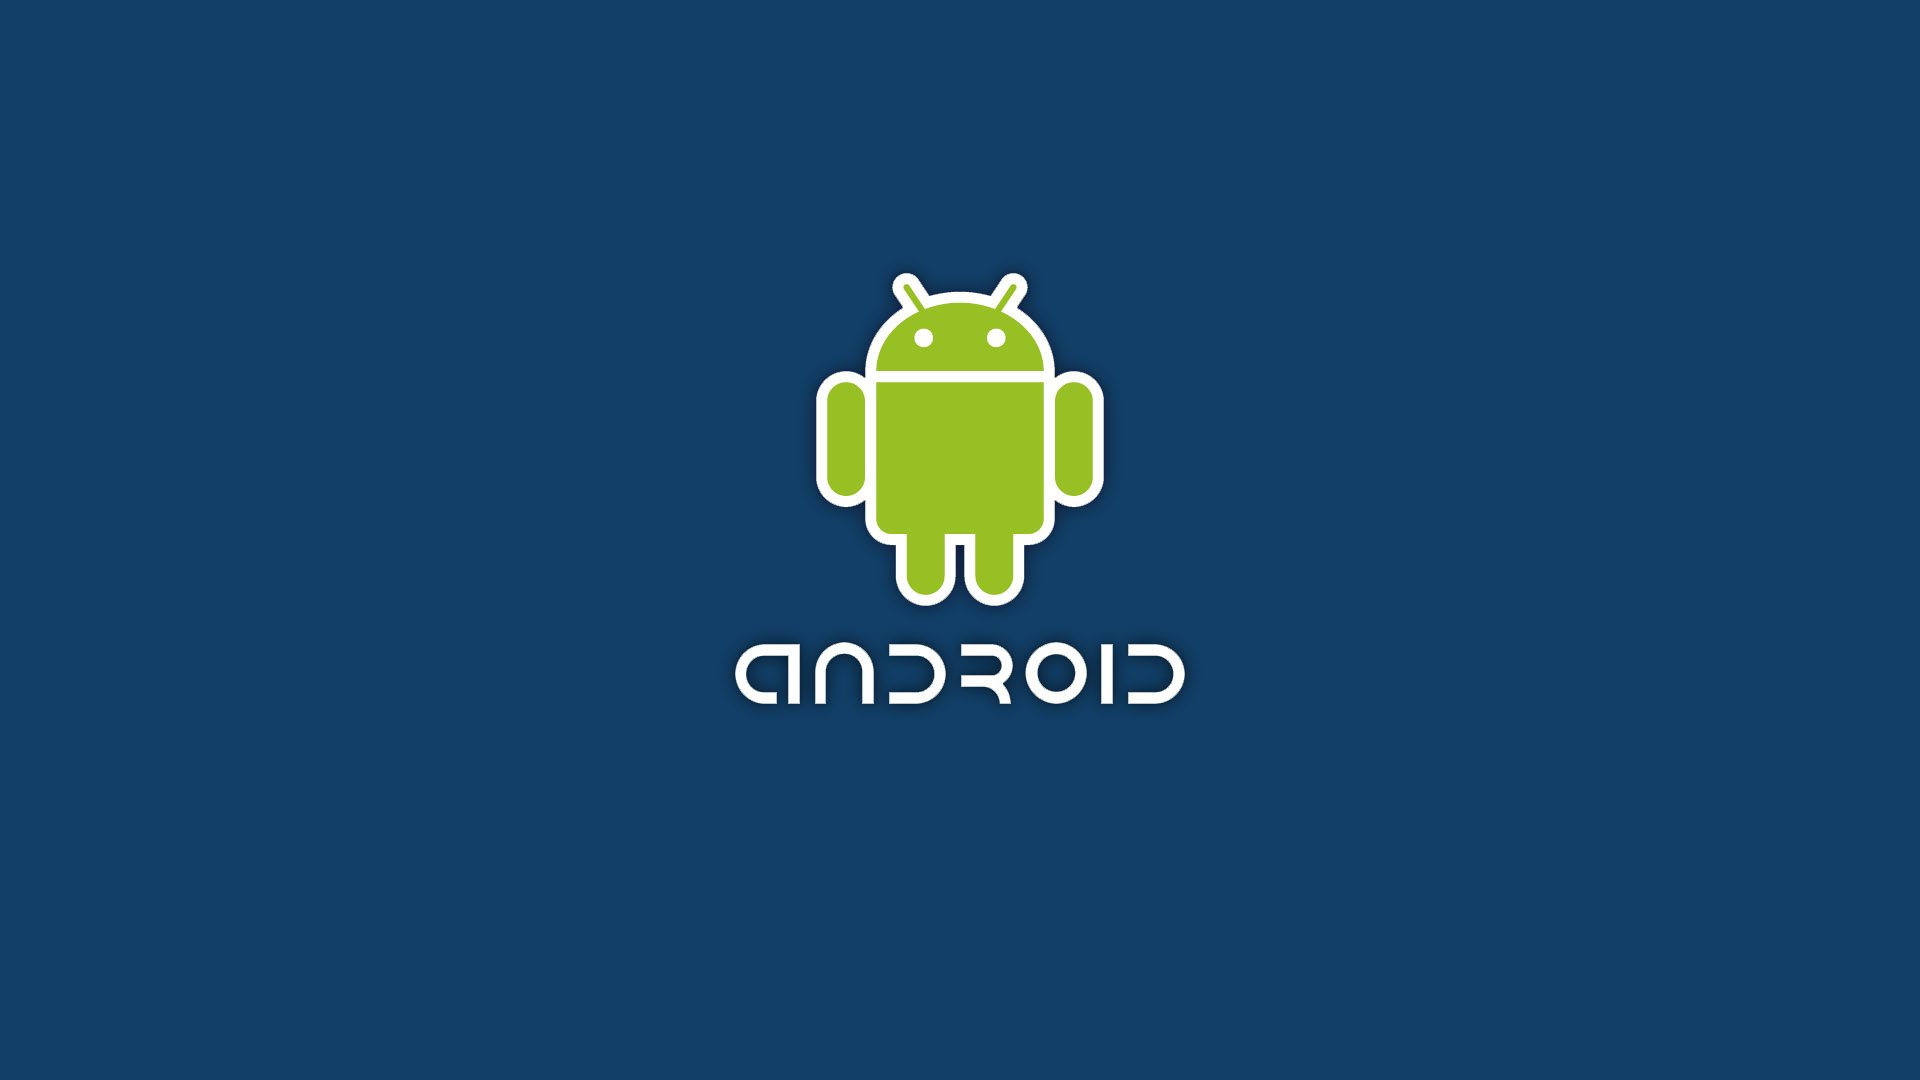 Android Os Wallpaper Blue High